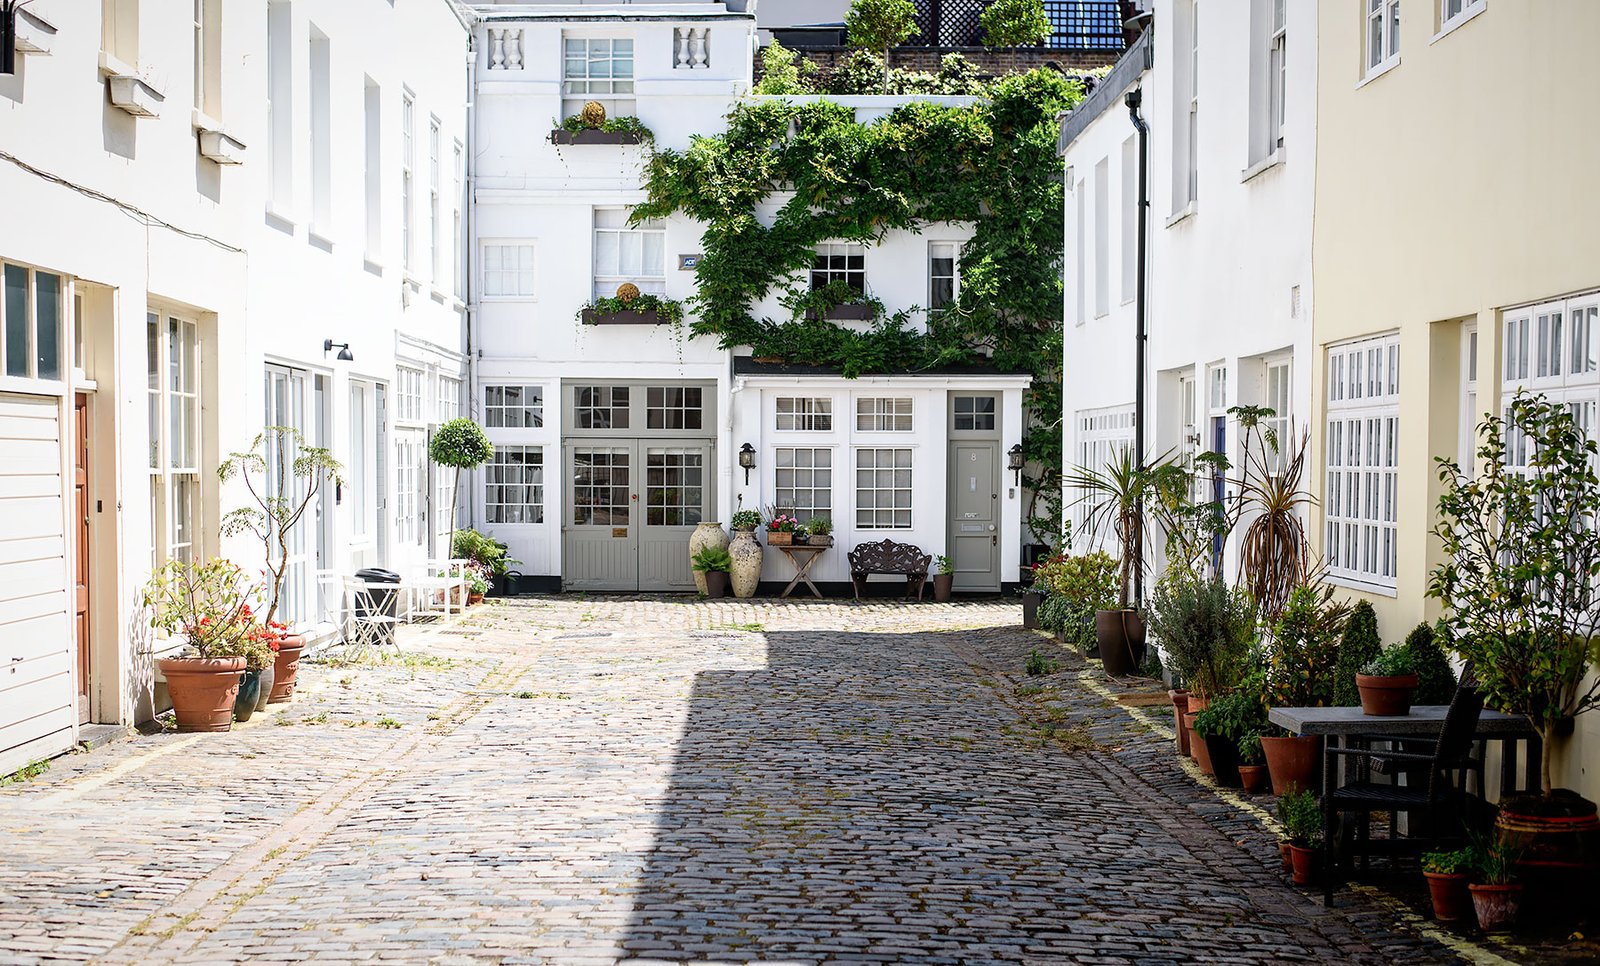 Pretty mews houses in London